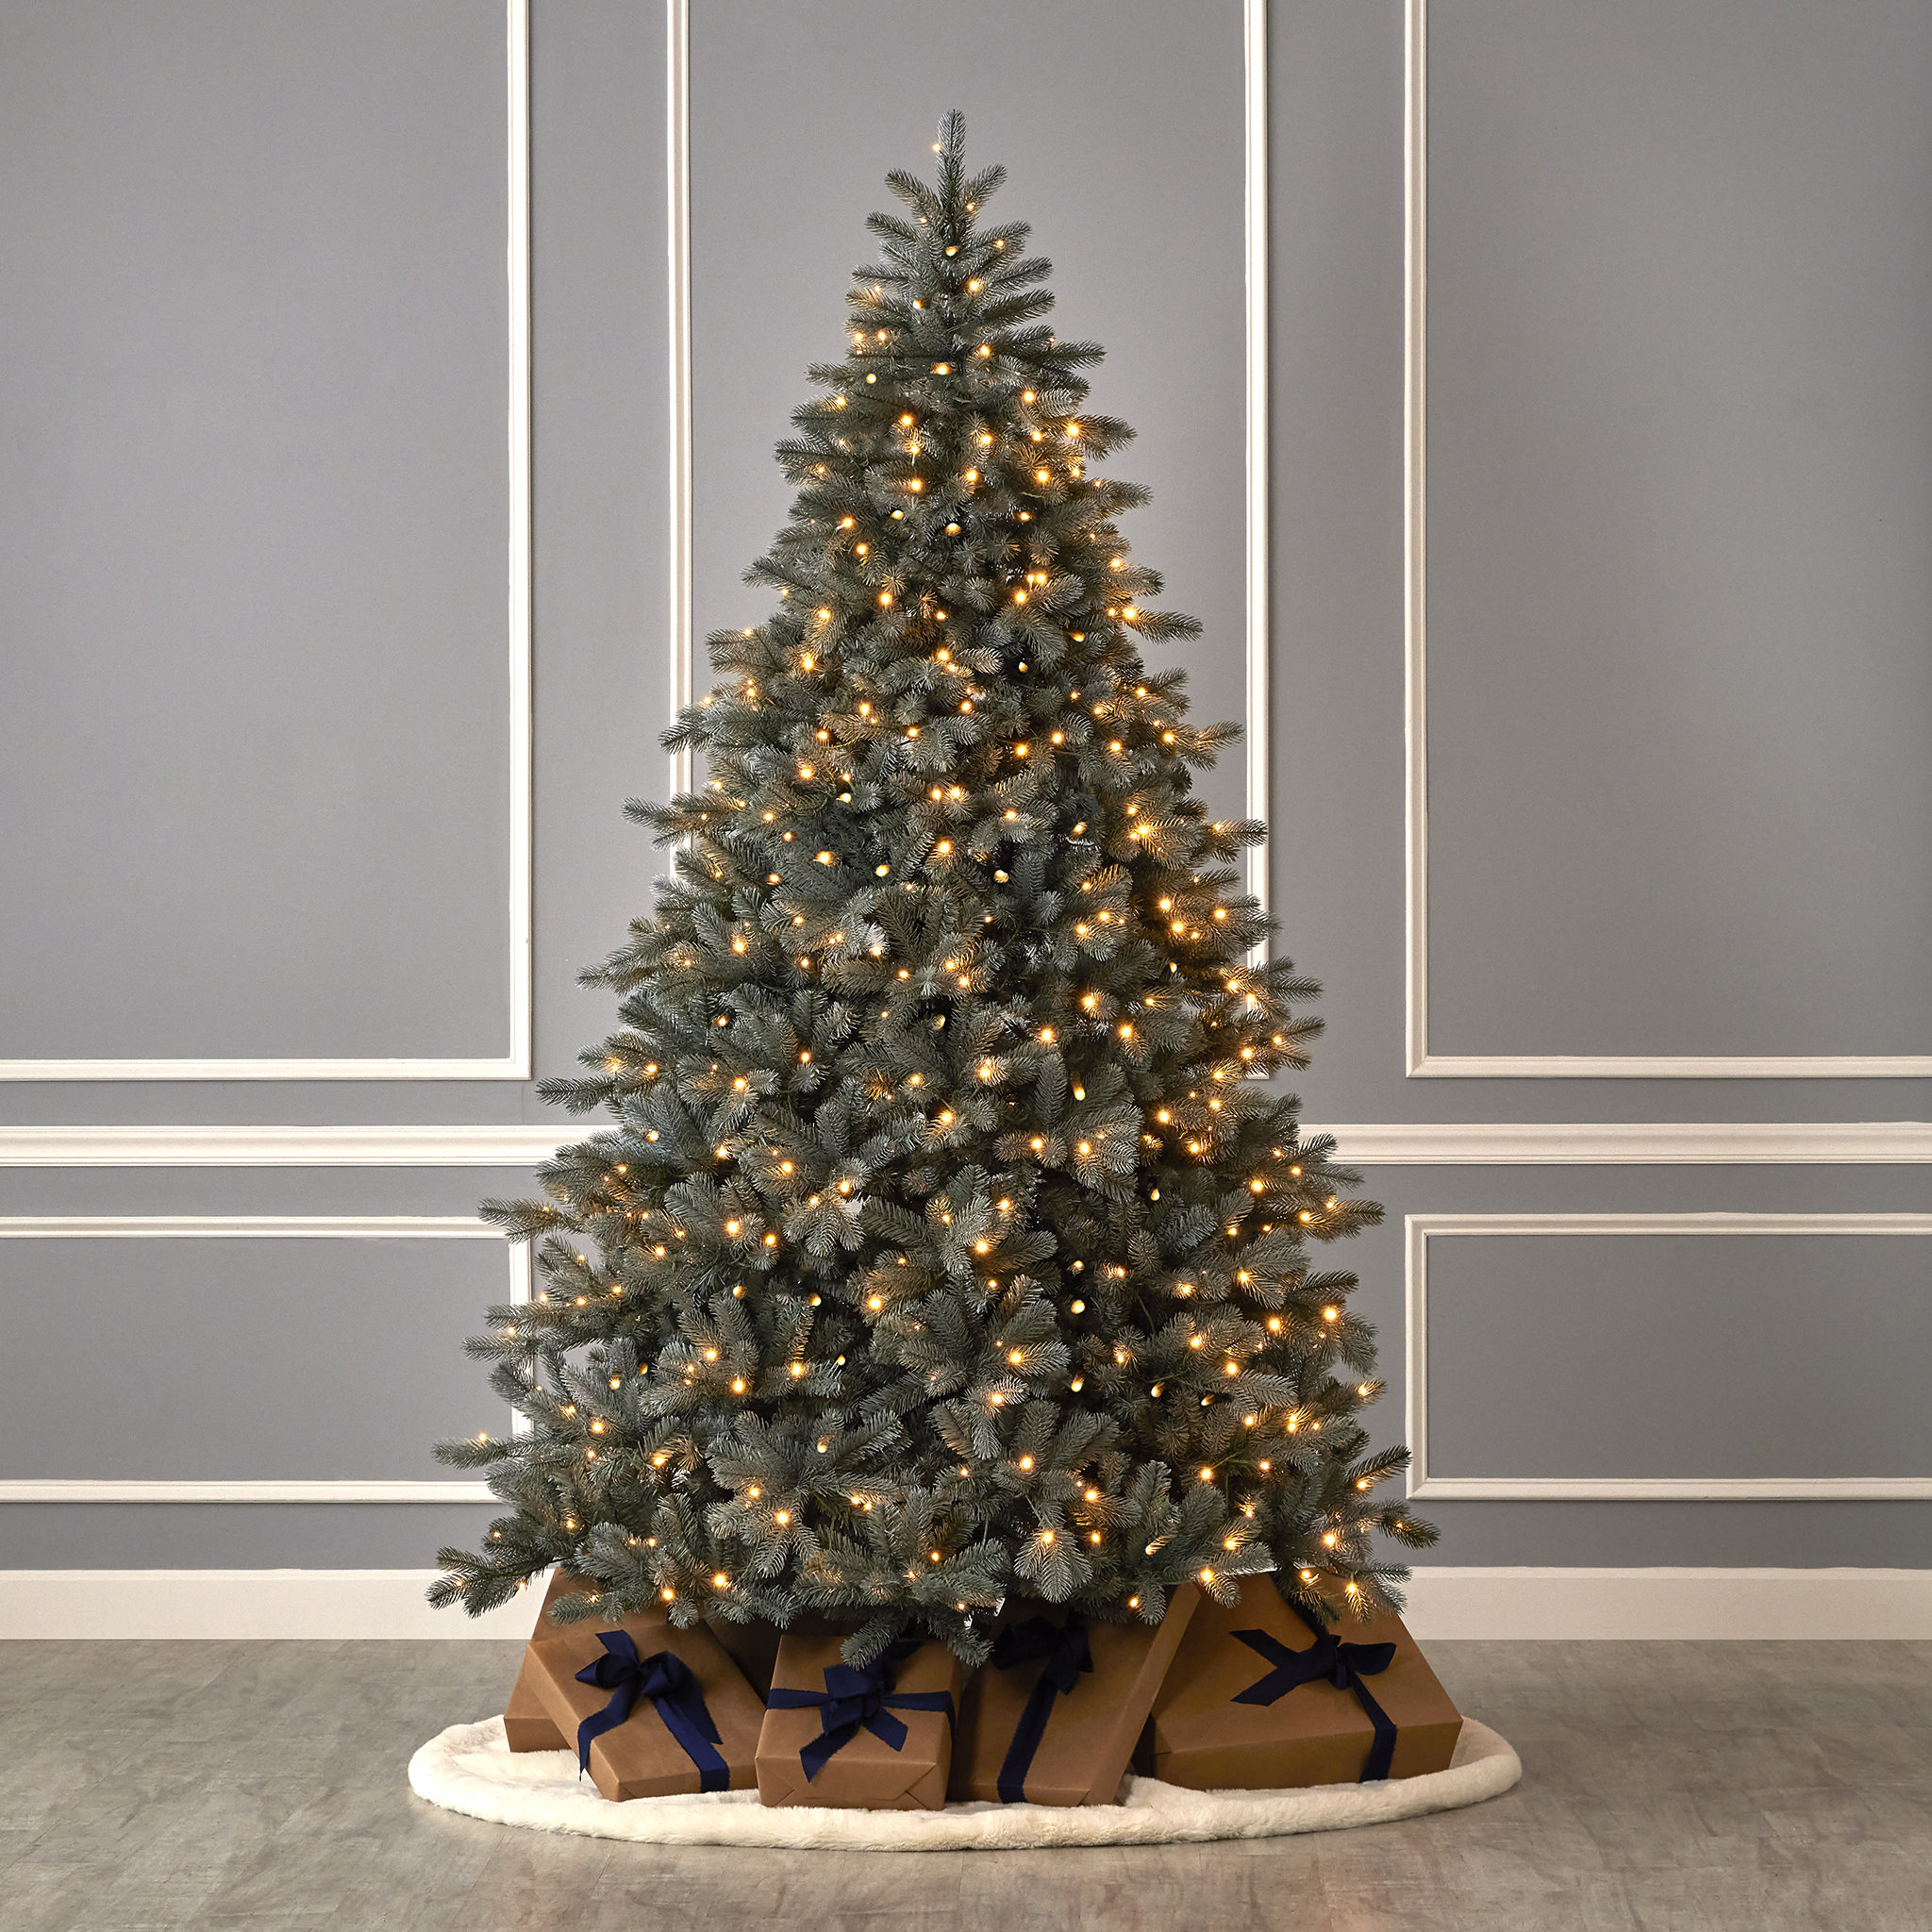 The Holiday Aisle® Lighted Artificial Christmas Tree - Includes a